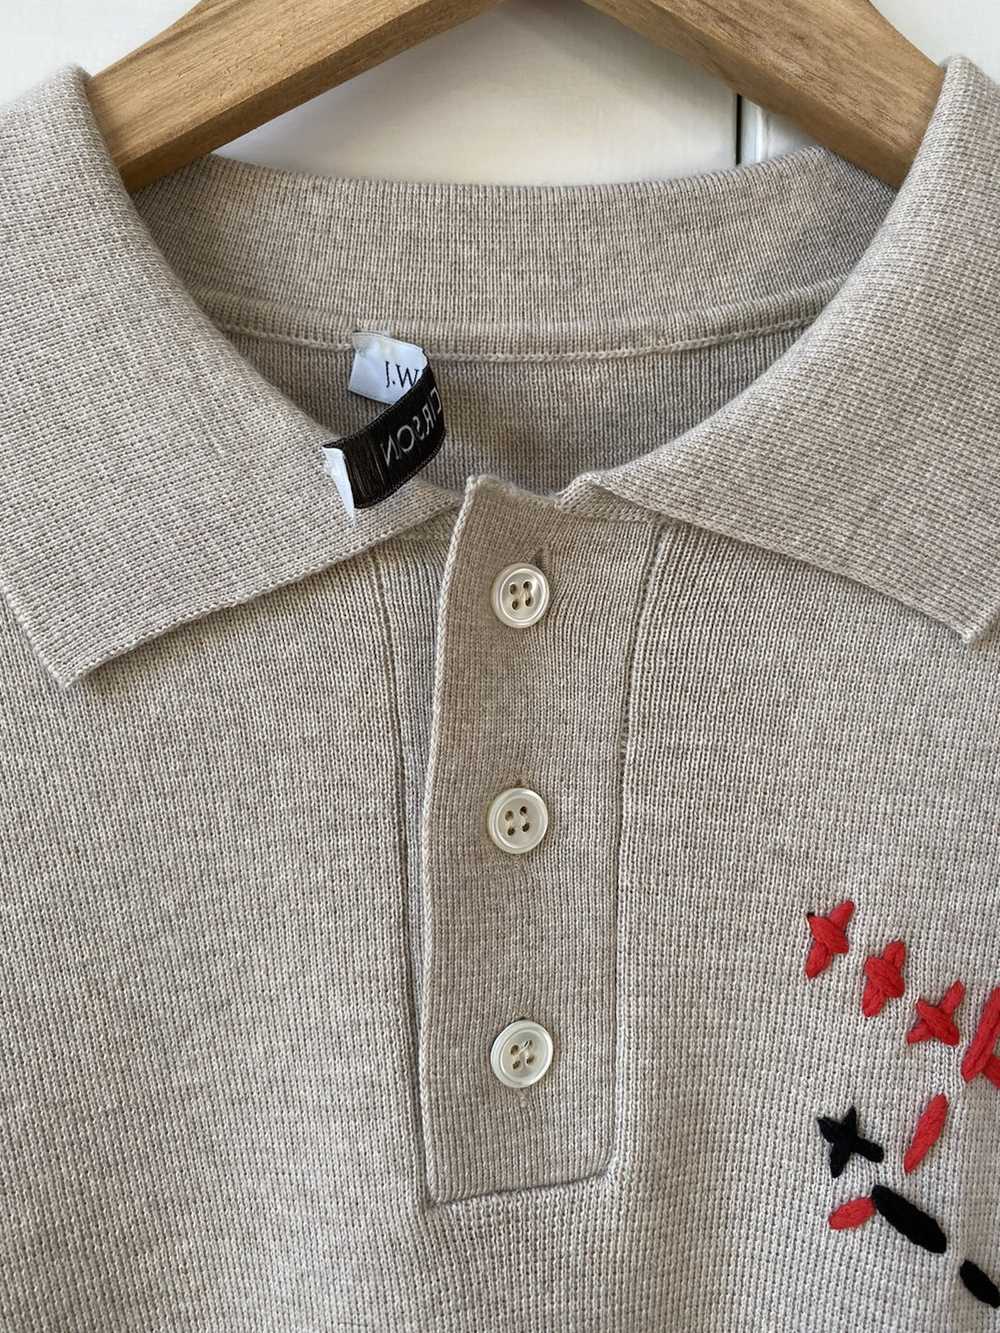 J.W.Anderson JW Anderson knitted polo - image 2